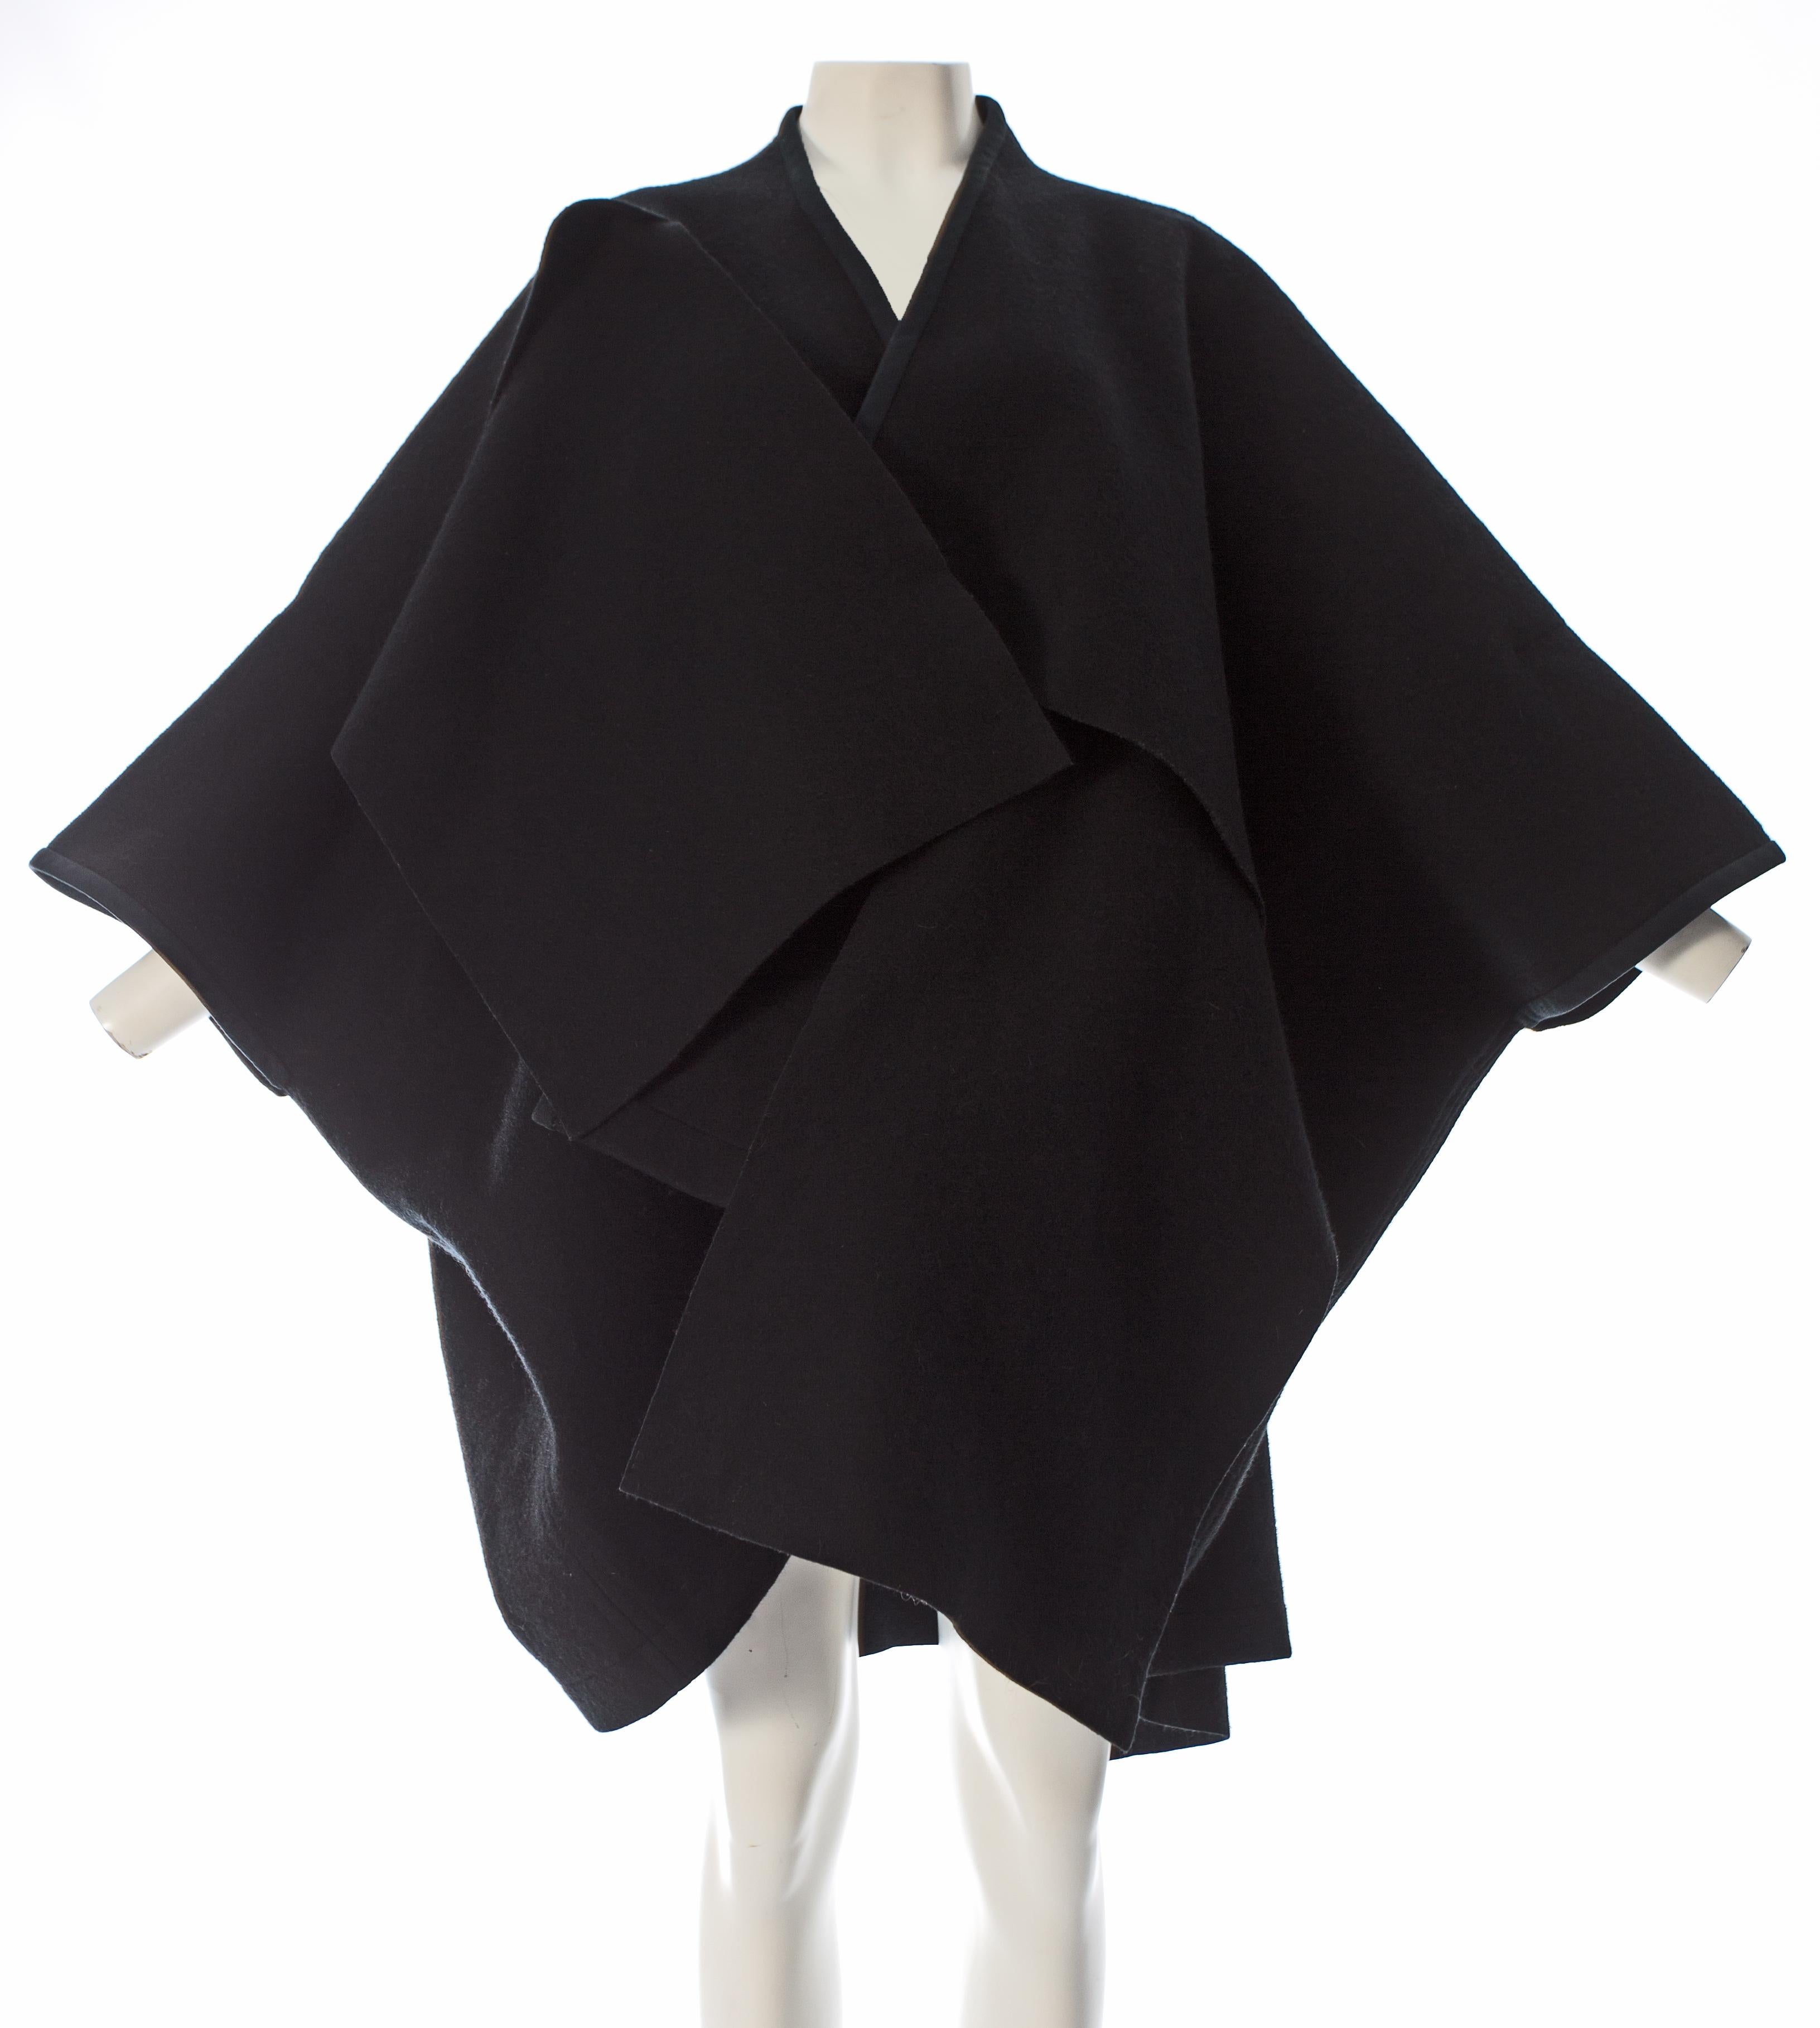 Comme des Garcons black wool coat constructed from large woven panels, AW 1983 2